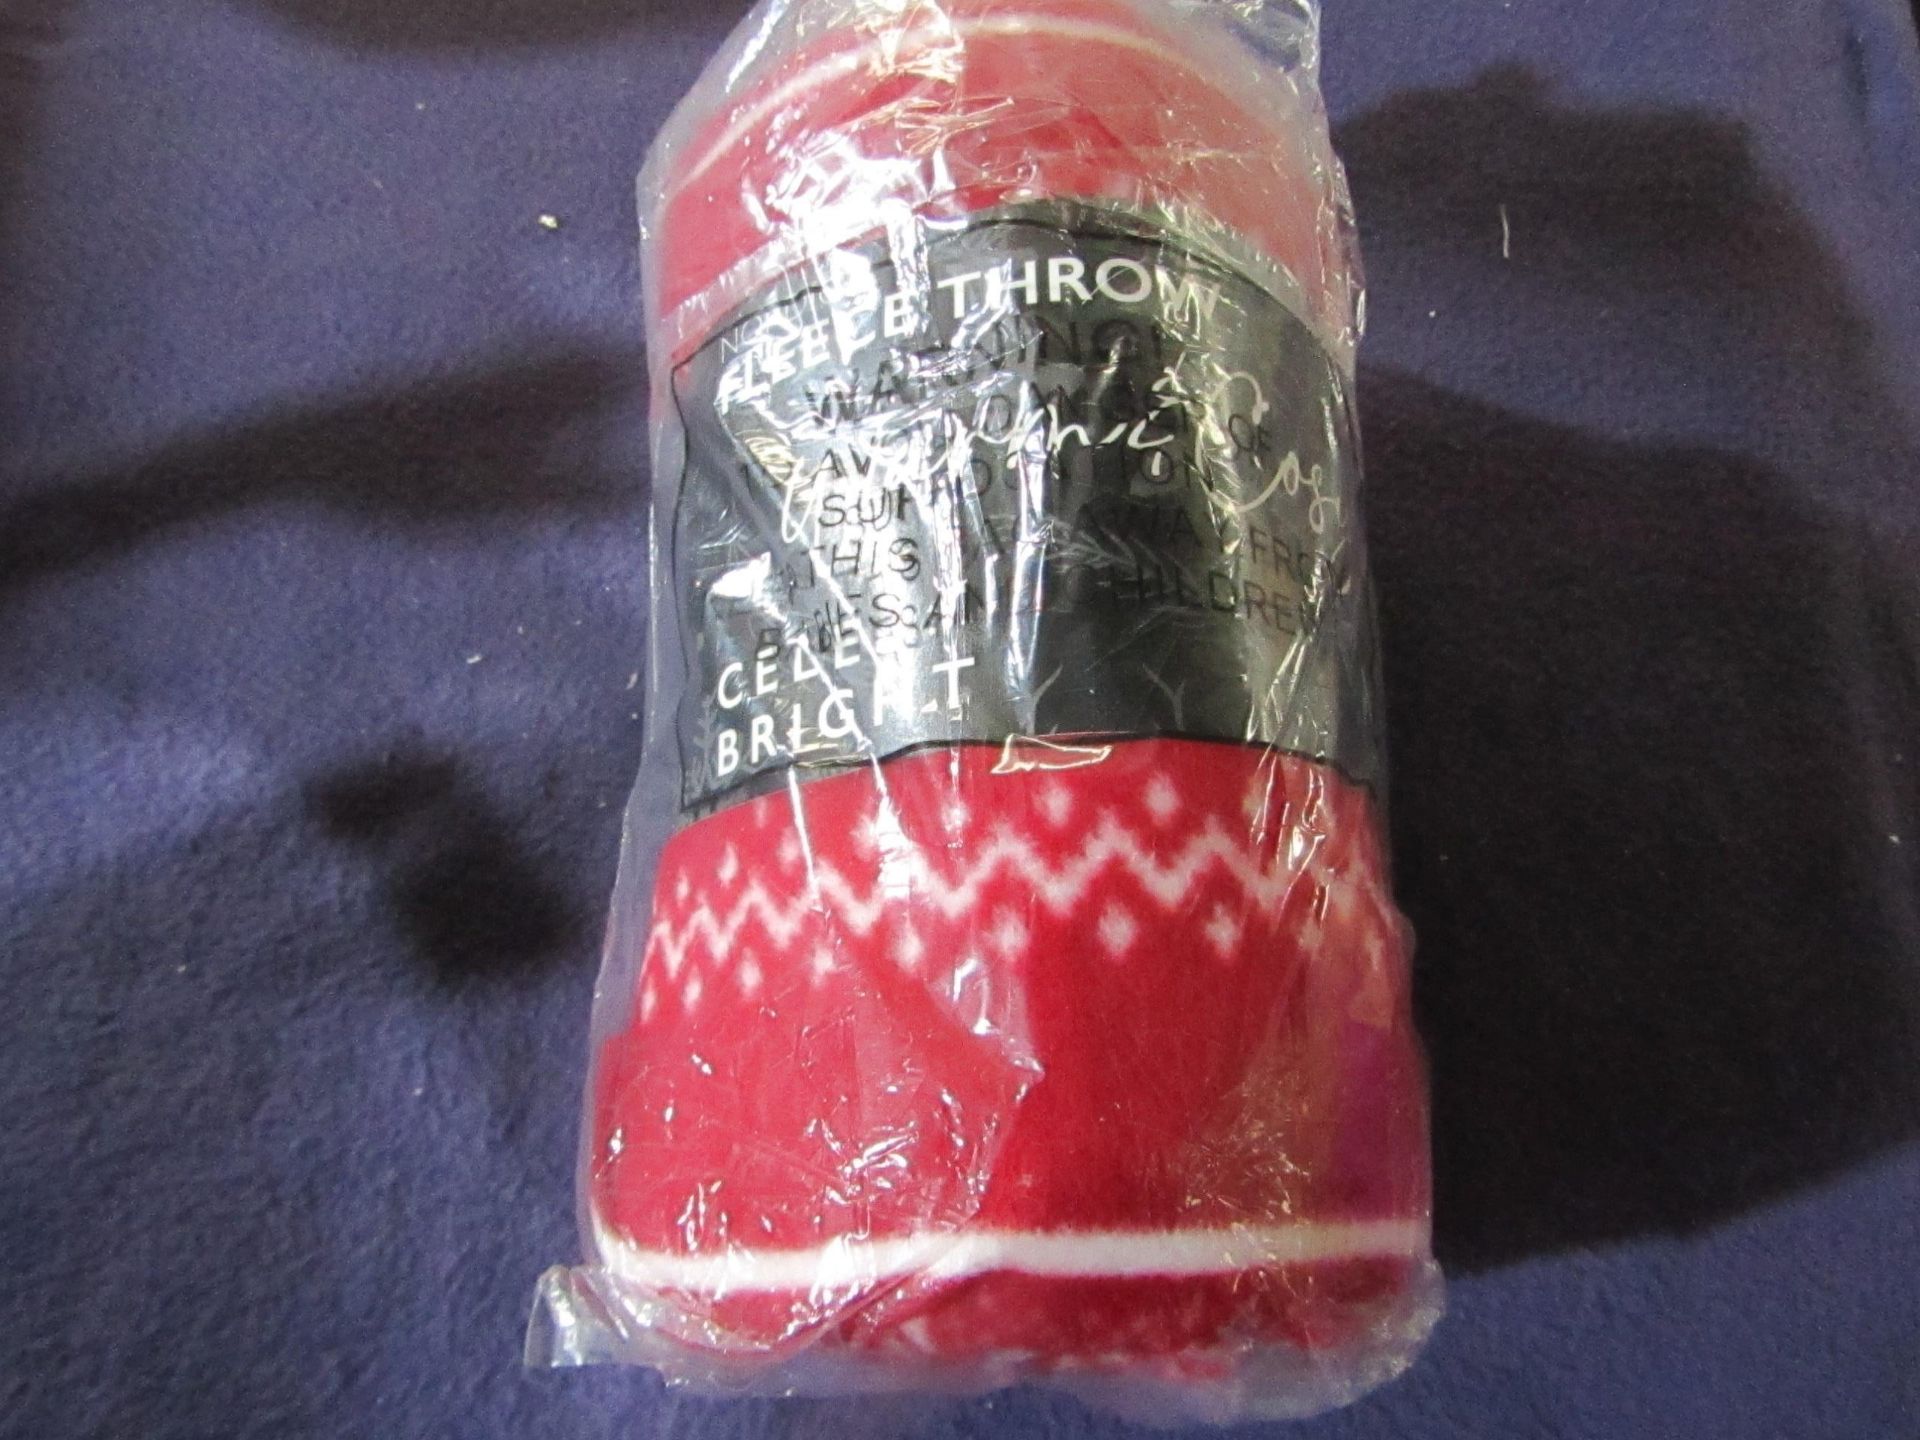 Celebright - Nordic Christmas Red Fleece Throw - Size Unknown - Non Original Packaging.